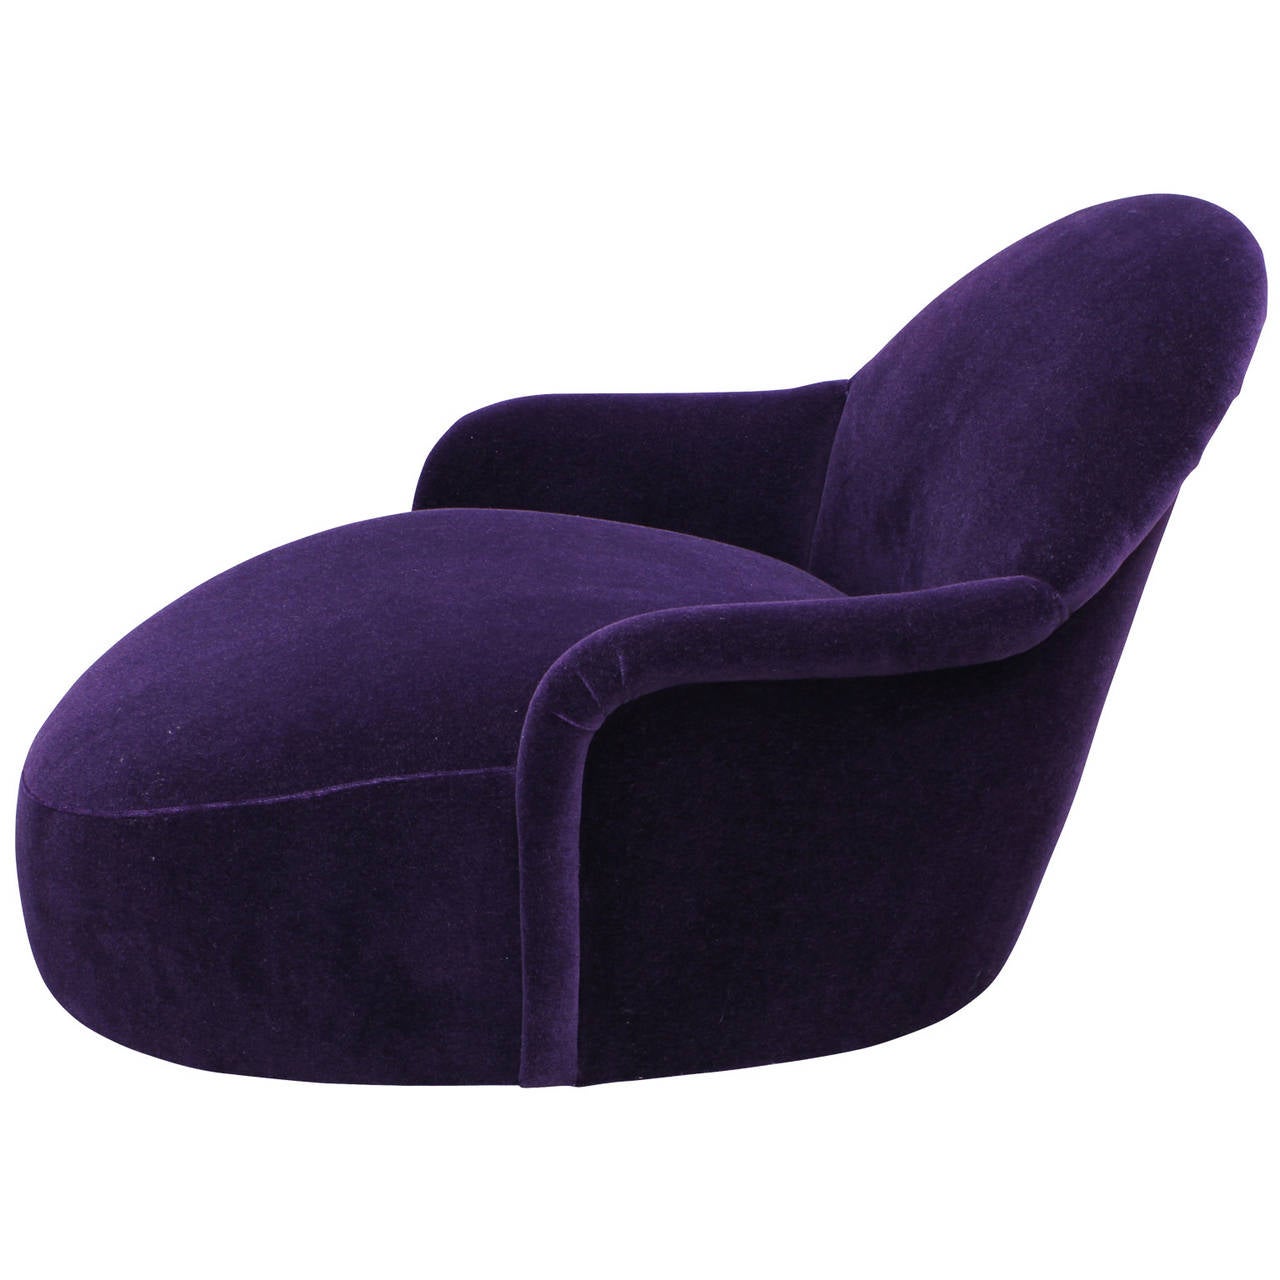 Beautiful and comfortable purple chaise lounge in the style of Milo Baughman for Thayer Coggin. The seat curves down ergonomically creating an incredibly comfortable piece. Chaise in freshly upholstered in a high piled, purple Danish Mohair velvet.